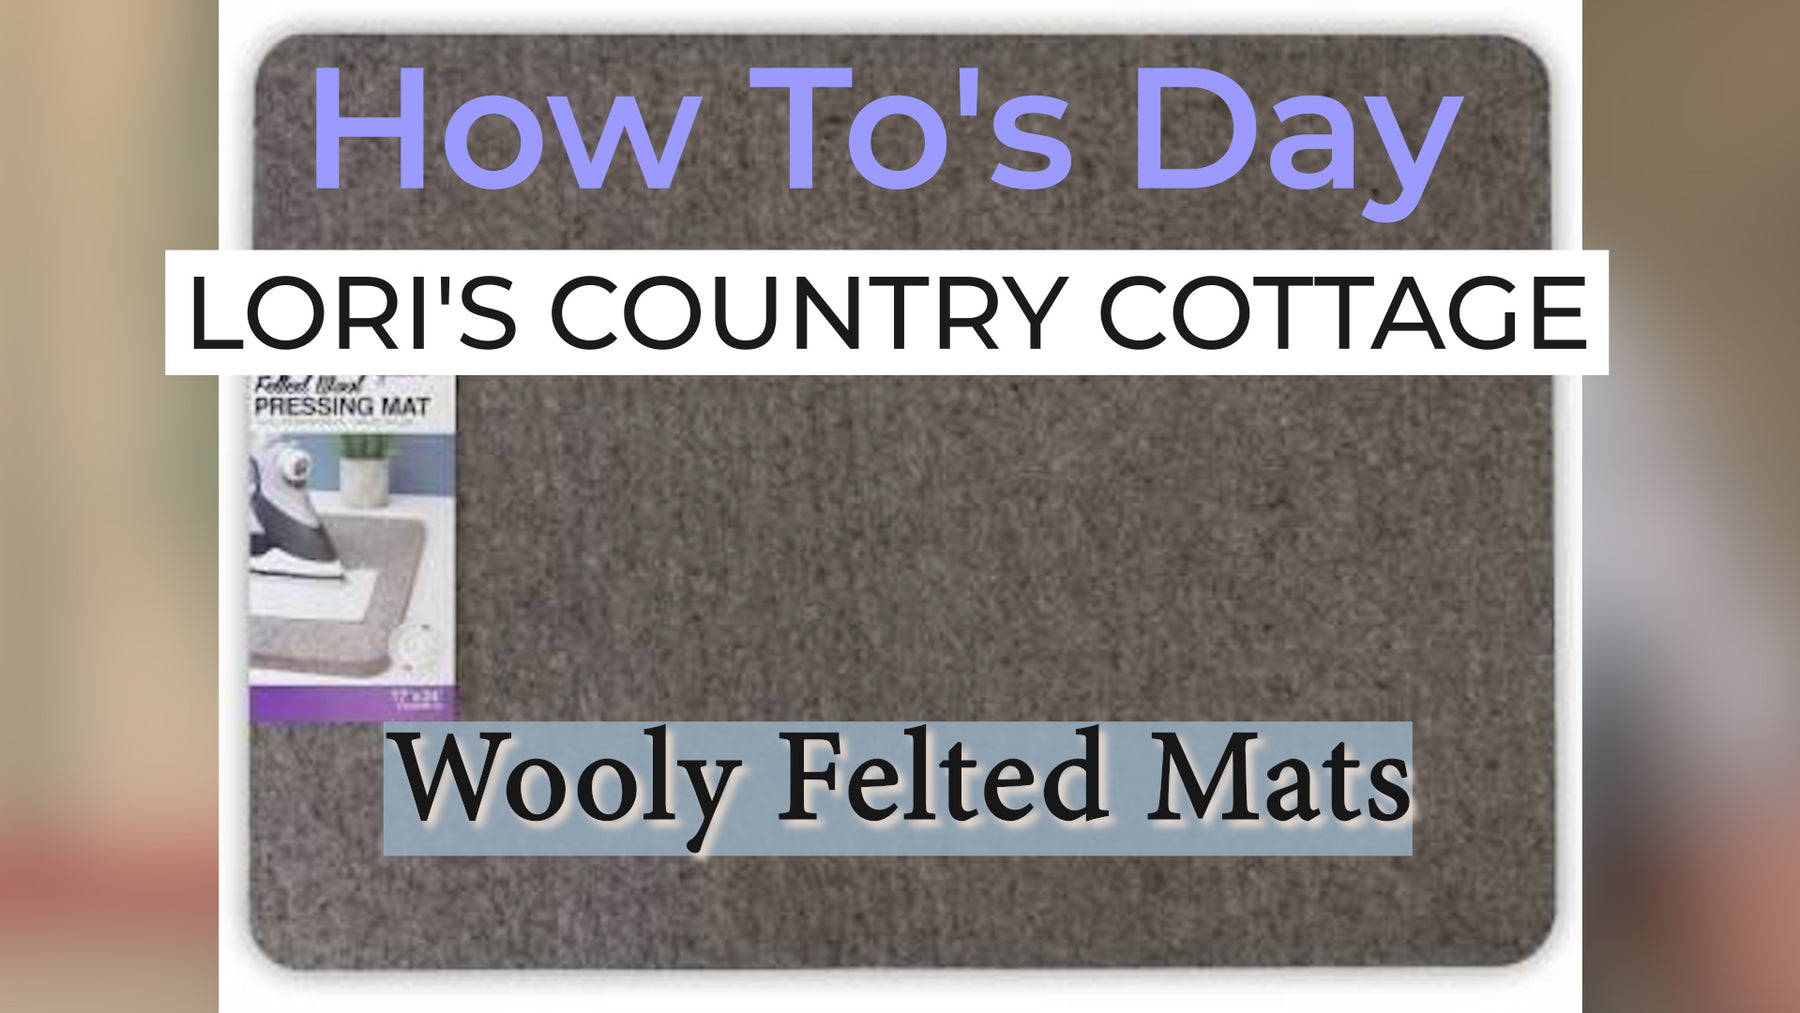 How To's Day - Wooly Felted Mats